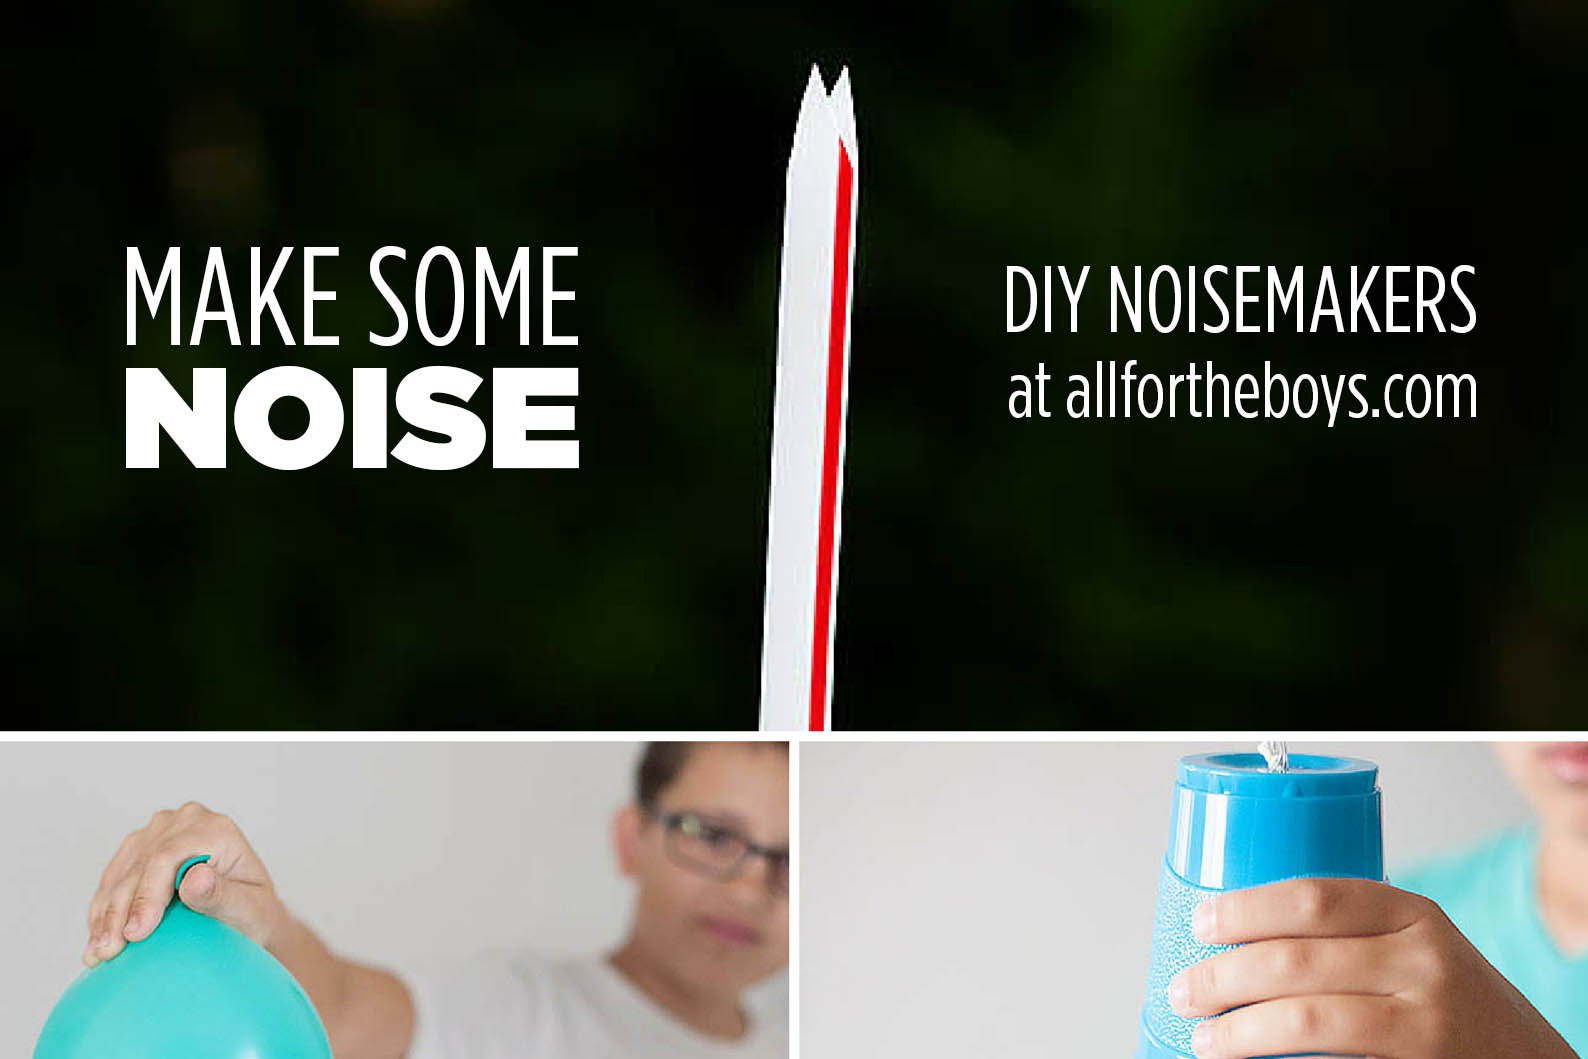 DIY noisemakers you can make at home - from allfortheboys.com